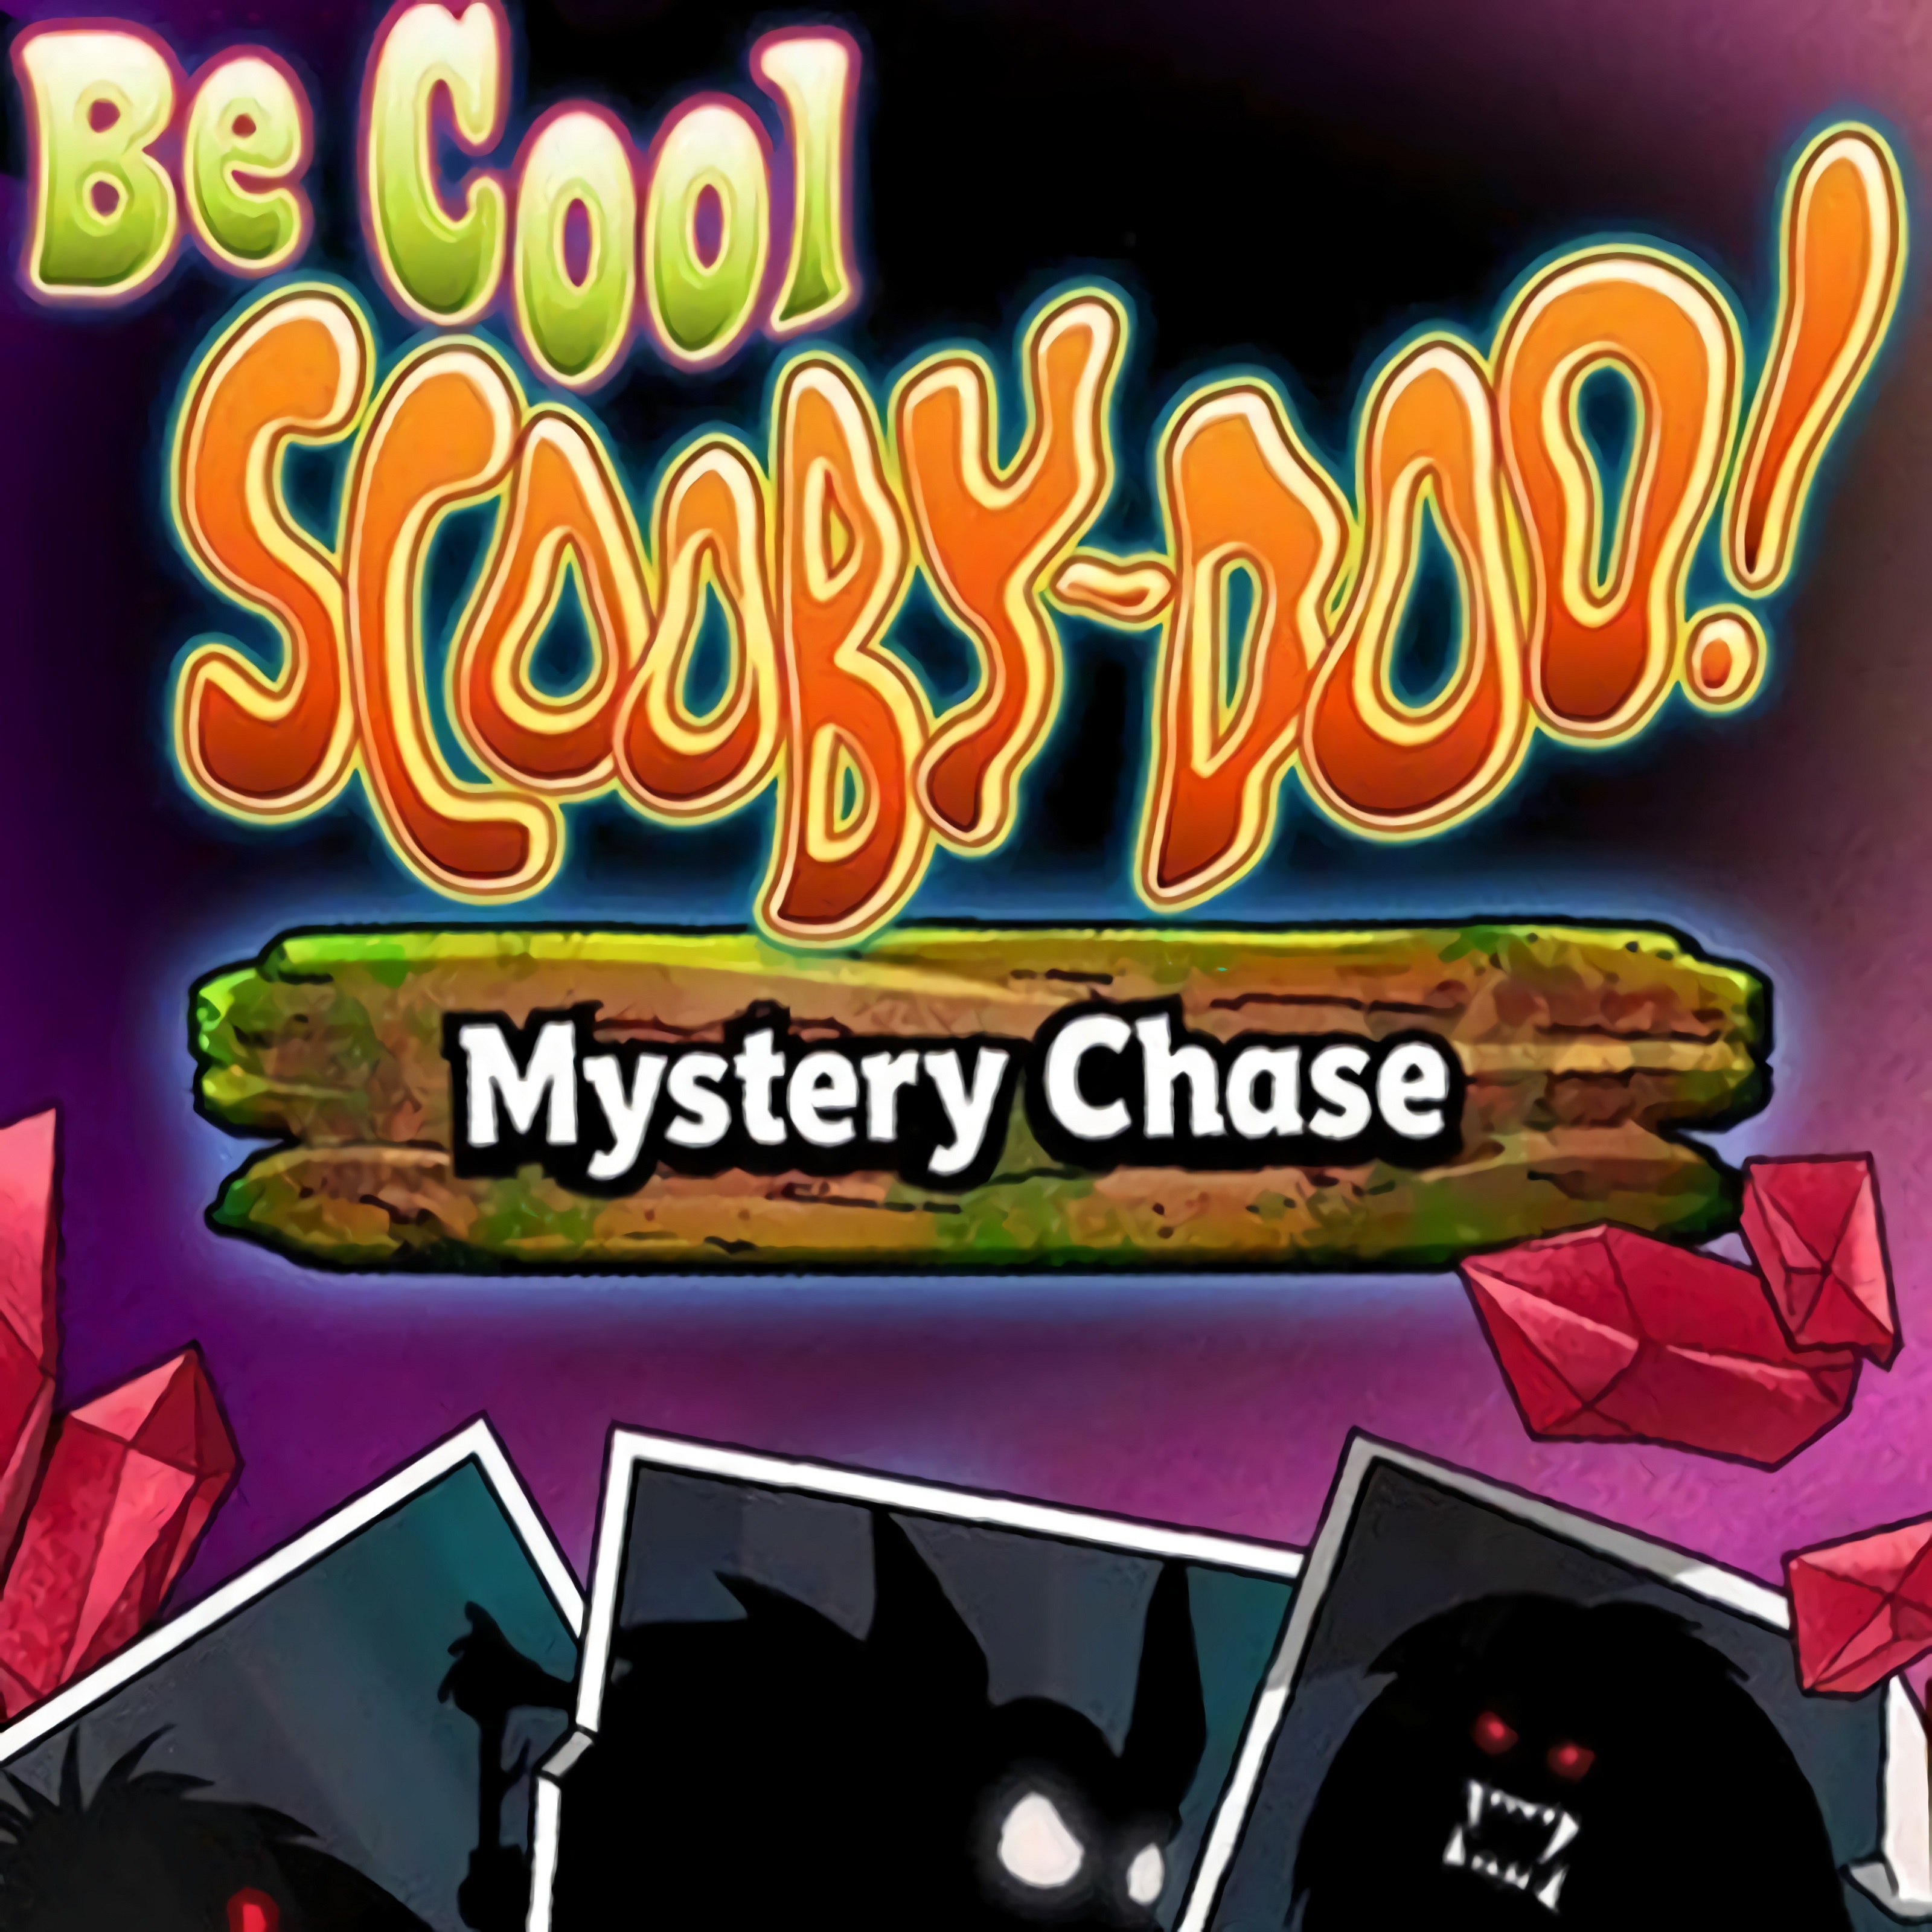 Scooby-Doo: Mystery Chase